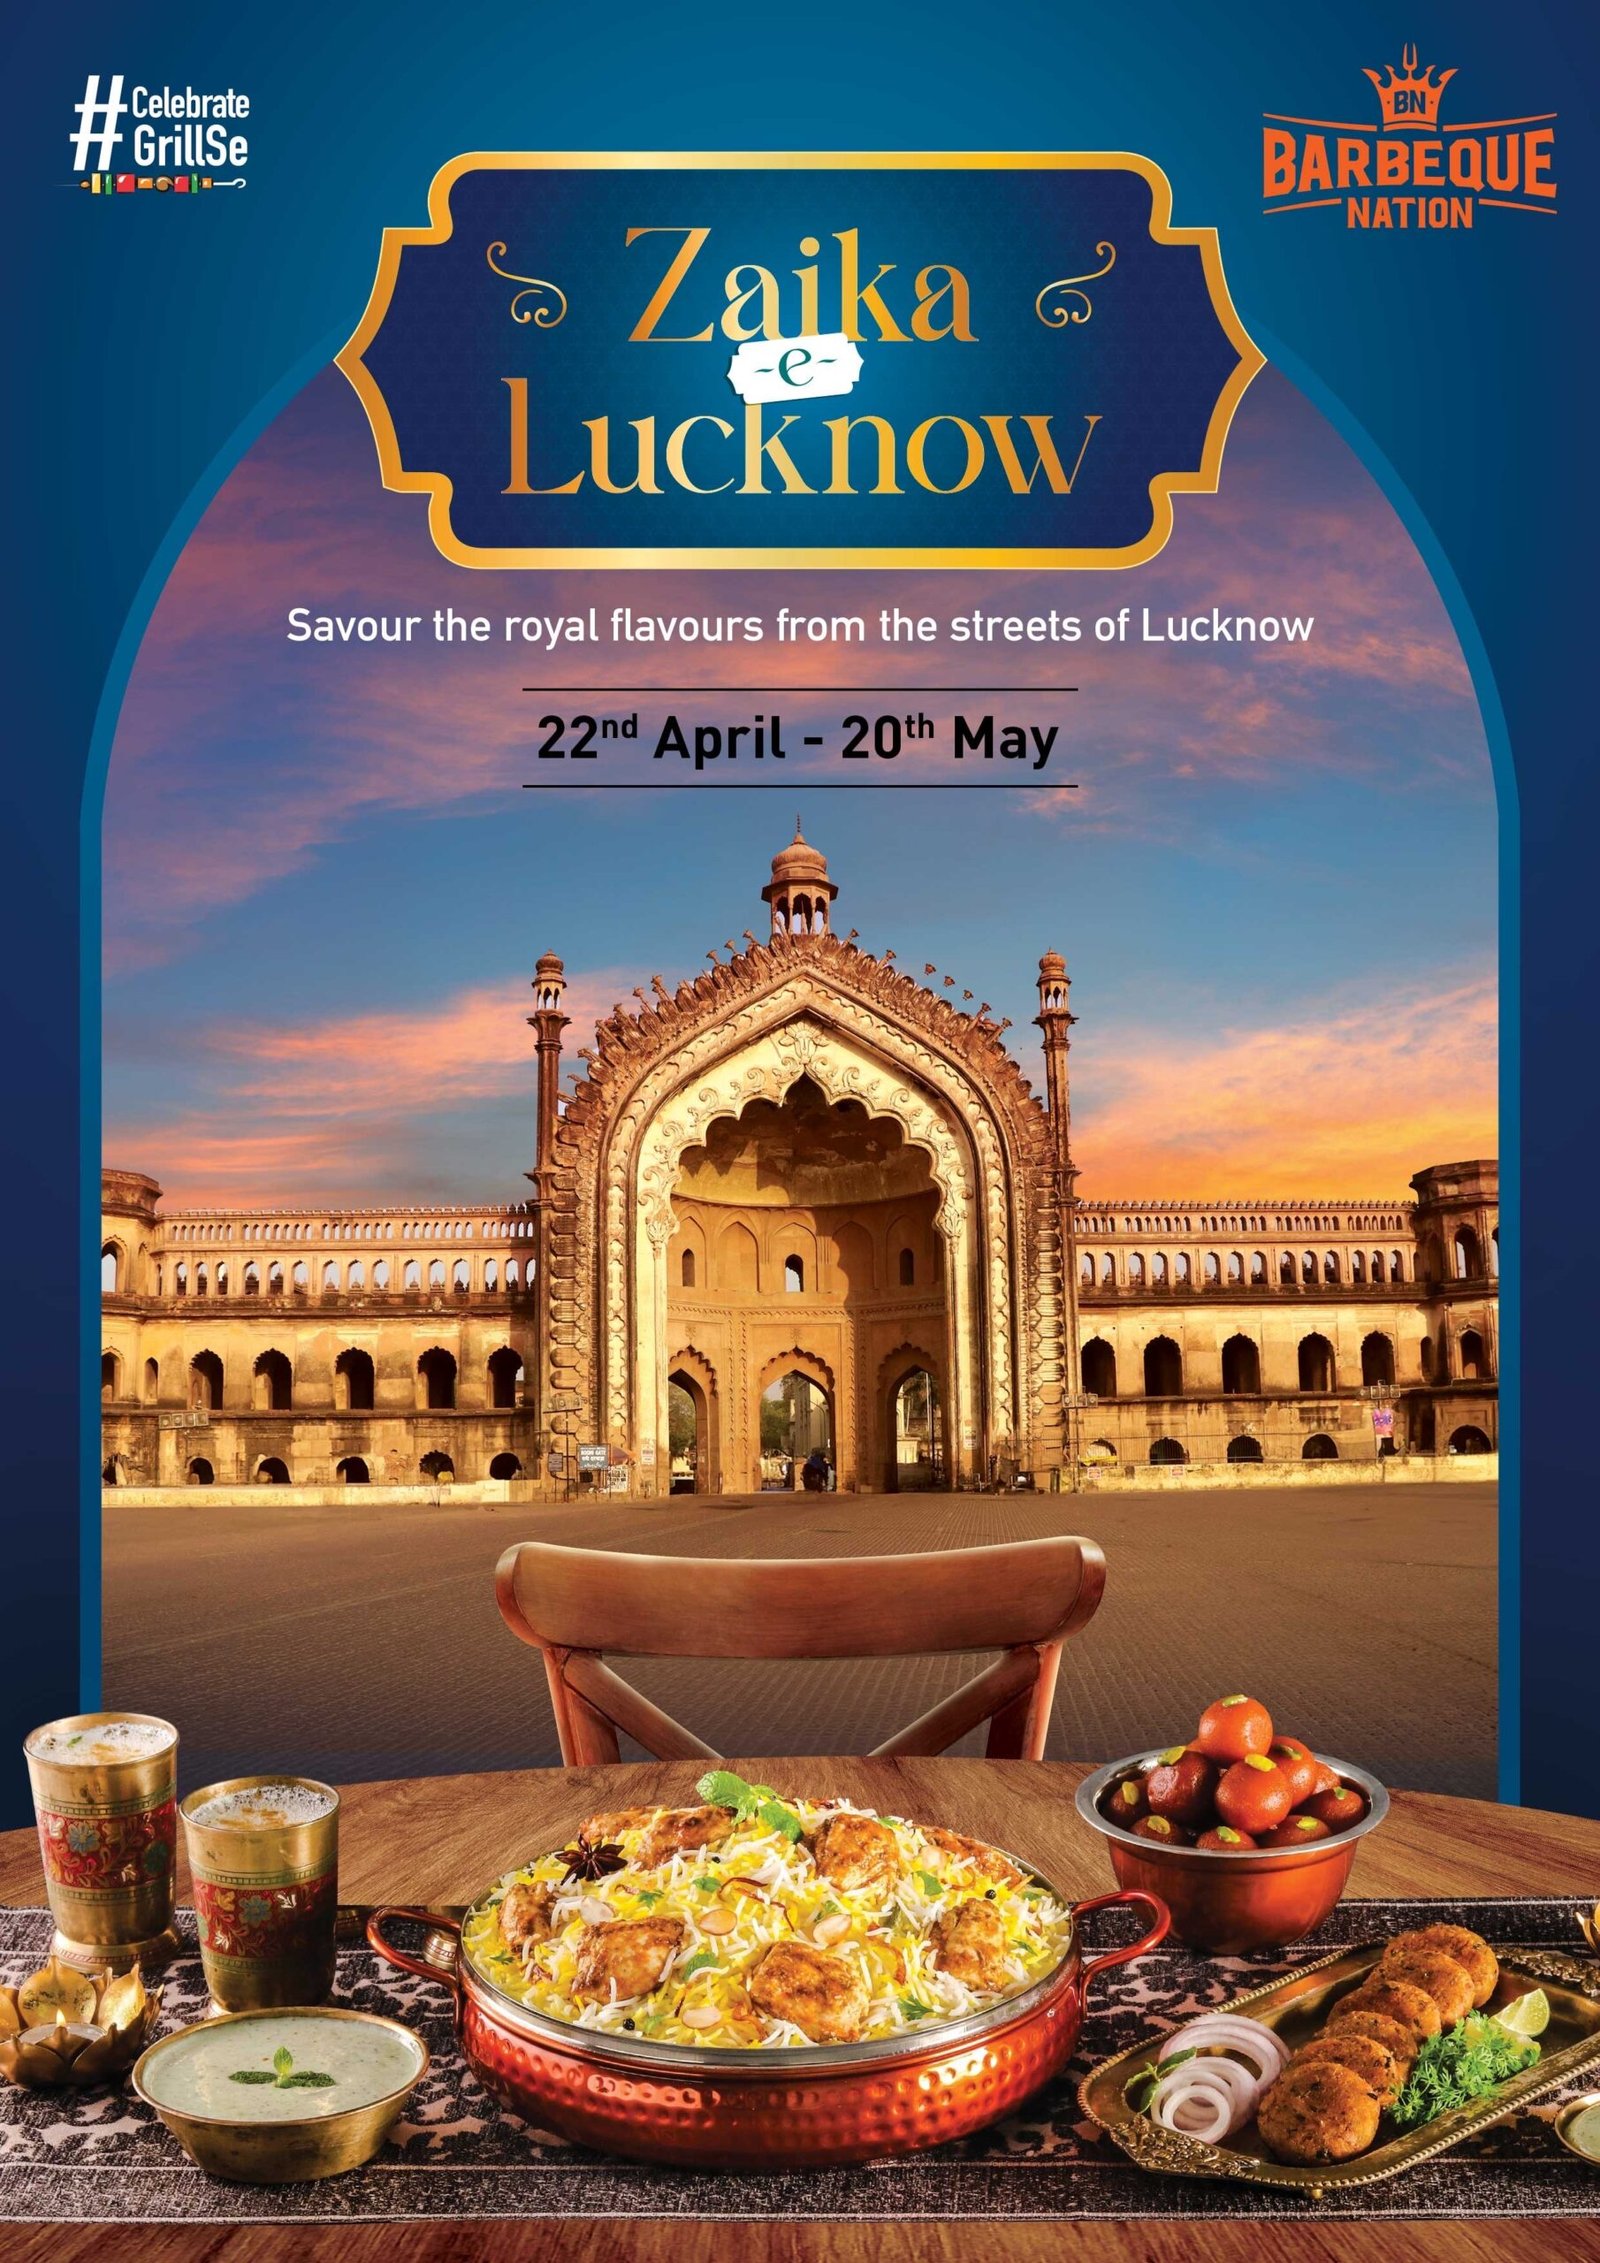 Barbeque Nation launches Zaika-e-Lucknow food festval